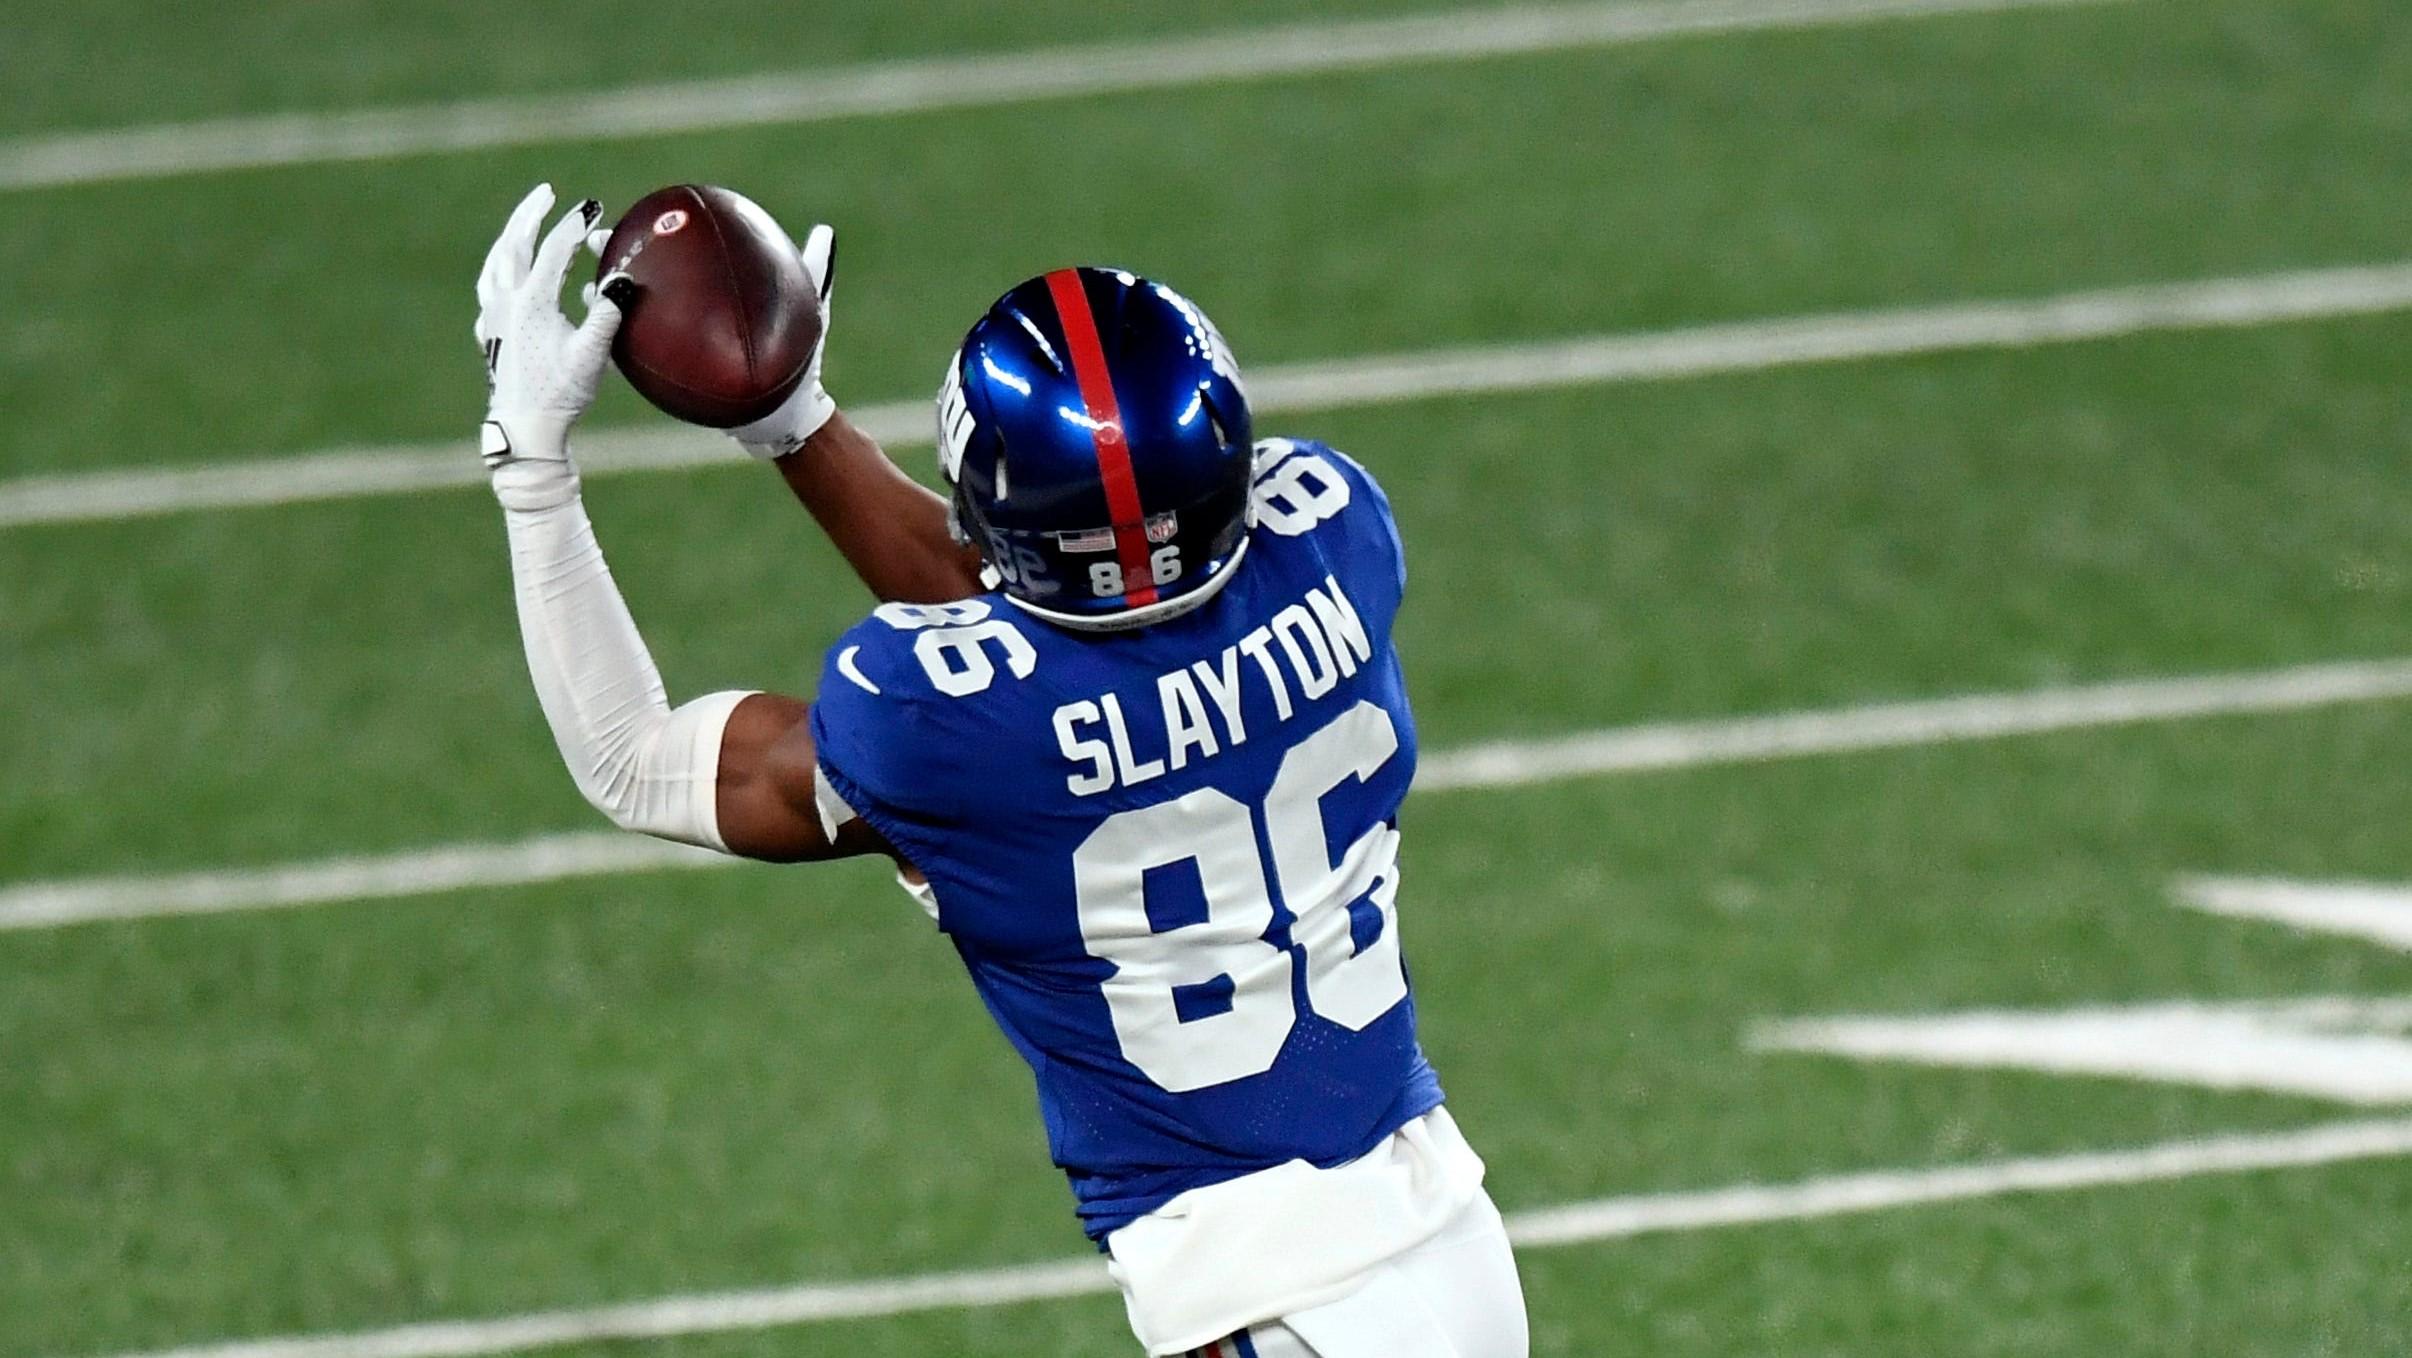 New York Giants wide receiver Darius Slayton (86) makes a catch in the first half of a game at MetLife Stadium on Sunday, December 20, 2020, in East Rutherford. / Danielle Parhizkaran